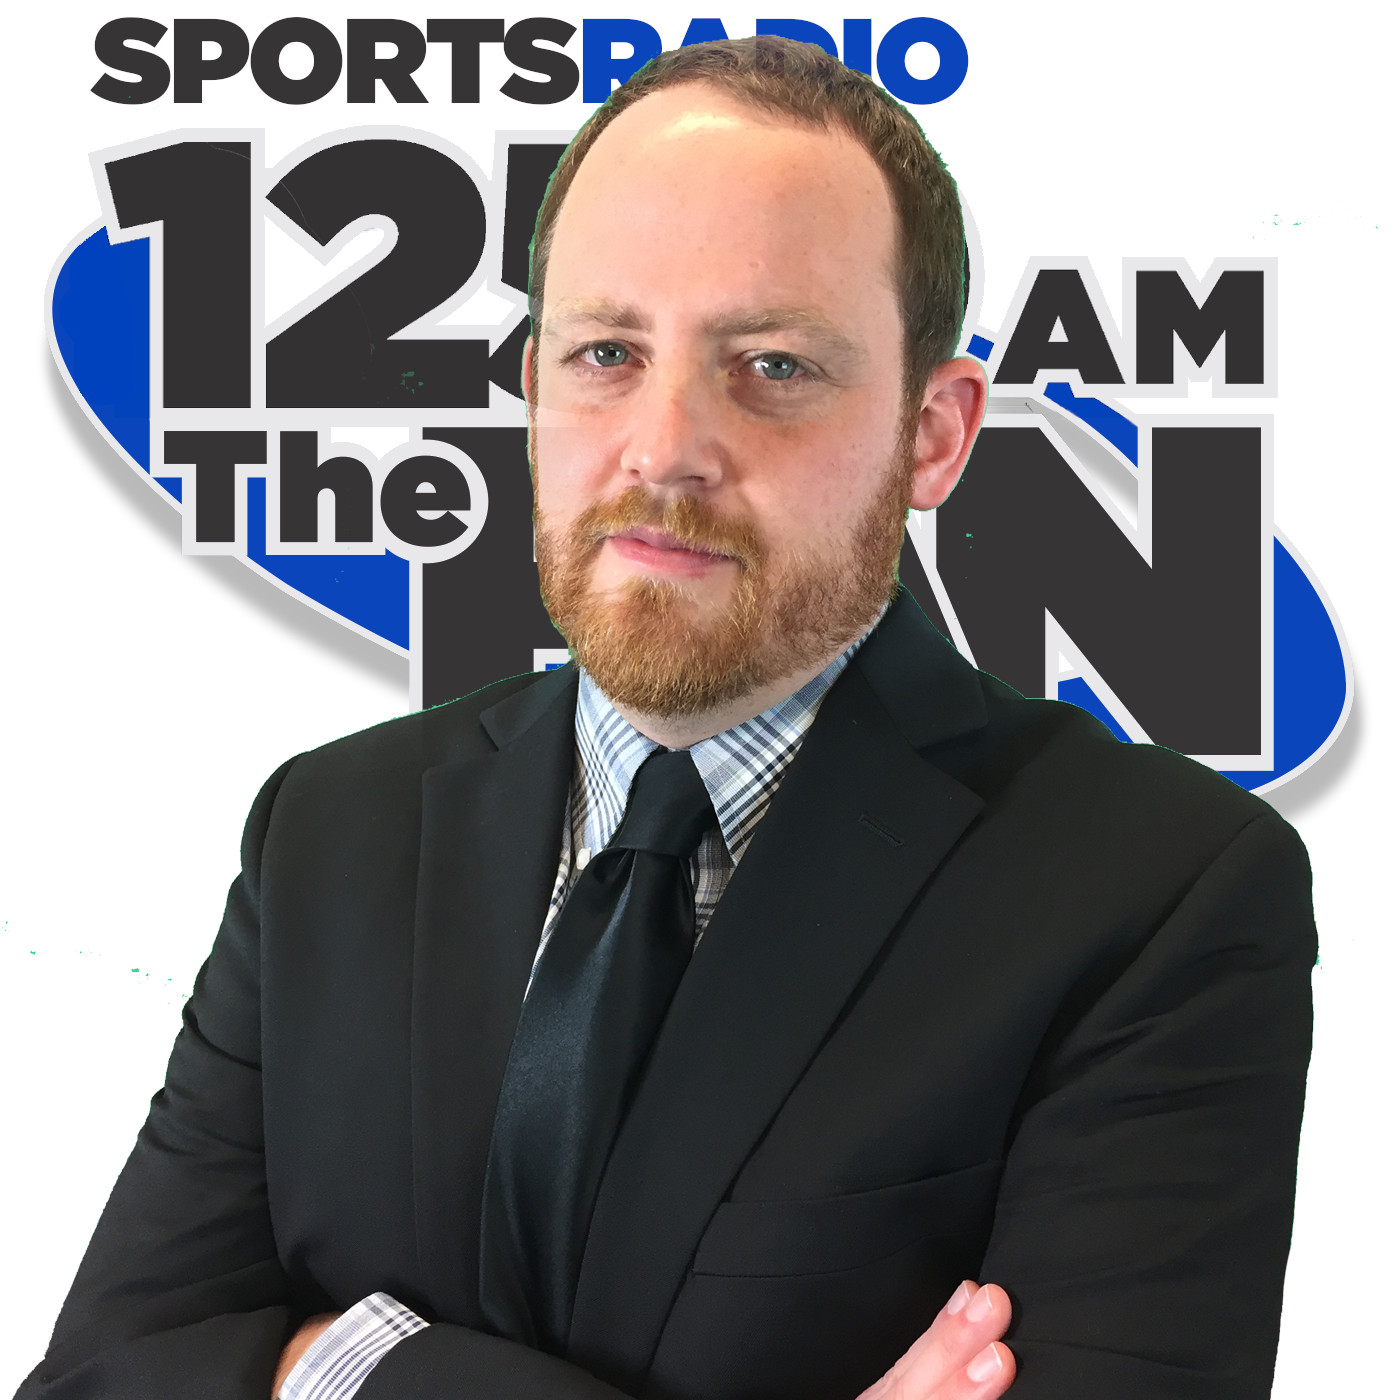 9 AM- Zach Gelb gives his thoughts on the Packers loss